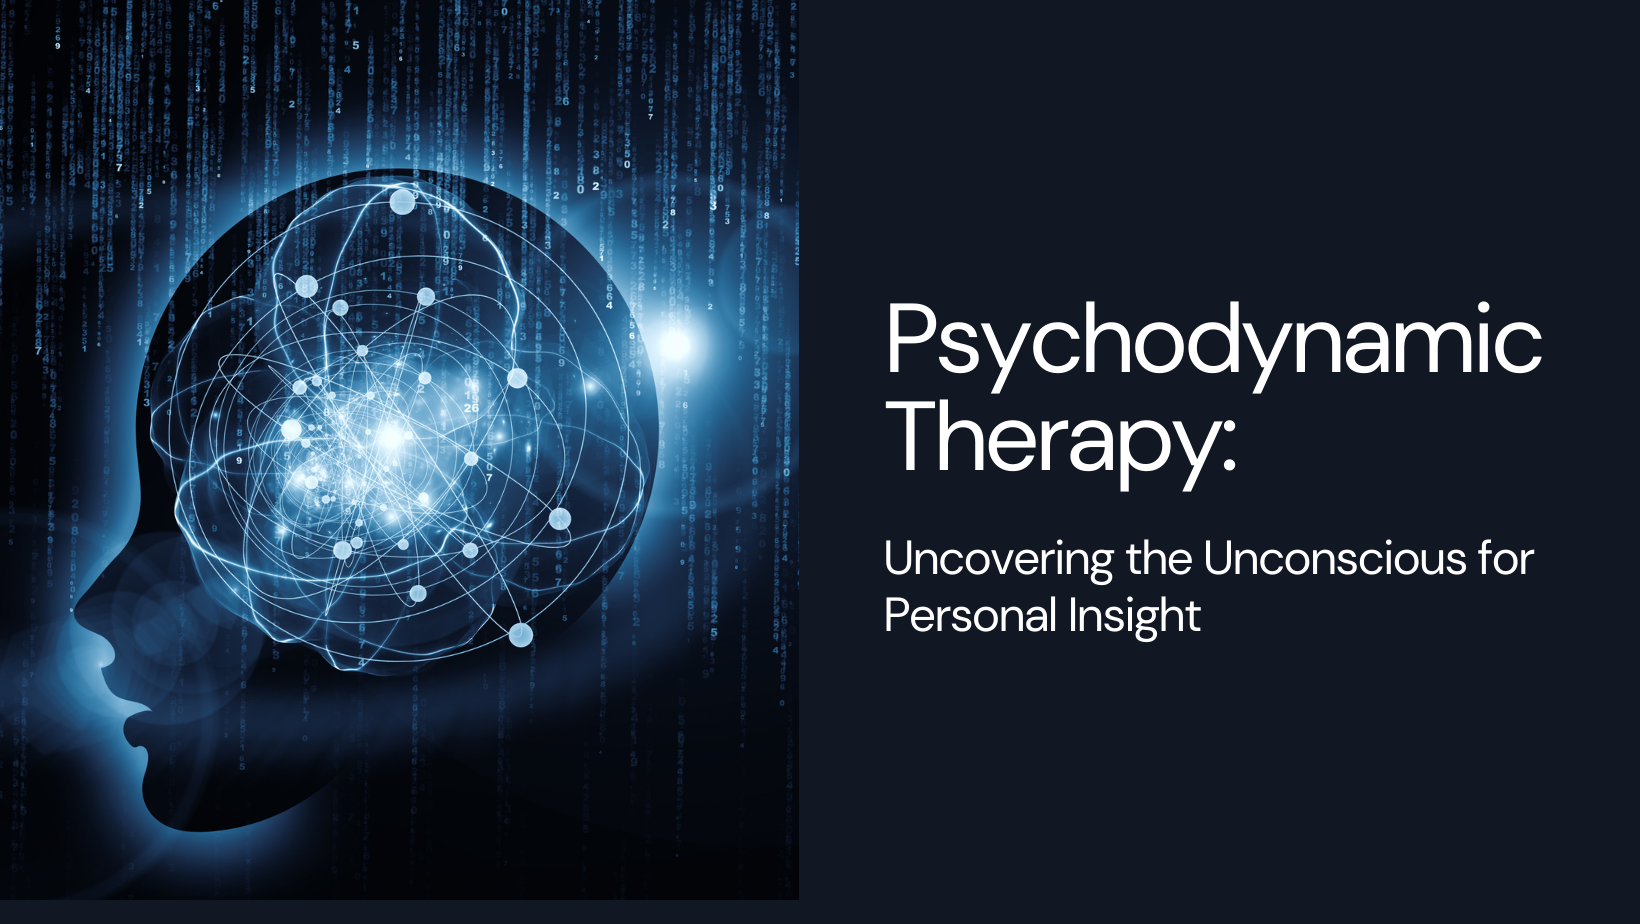 Psychodynamic Therapy: Uncovering the Unconscious for Personal Insight